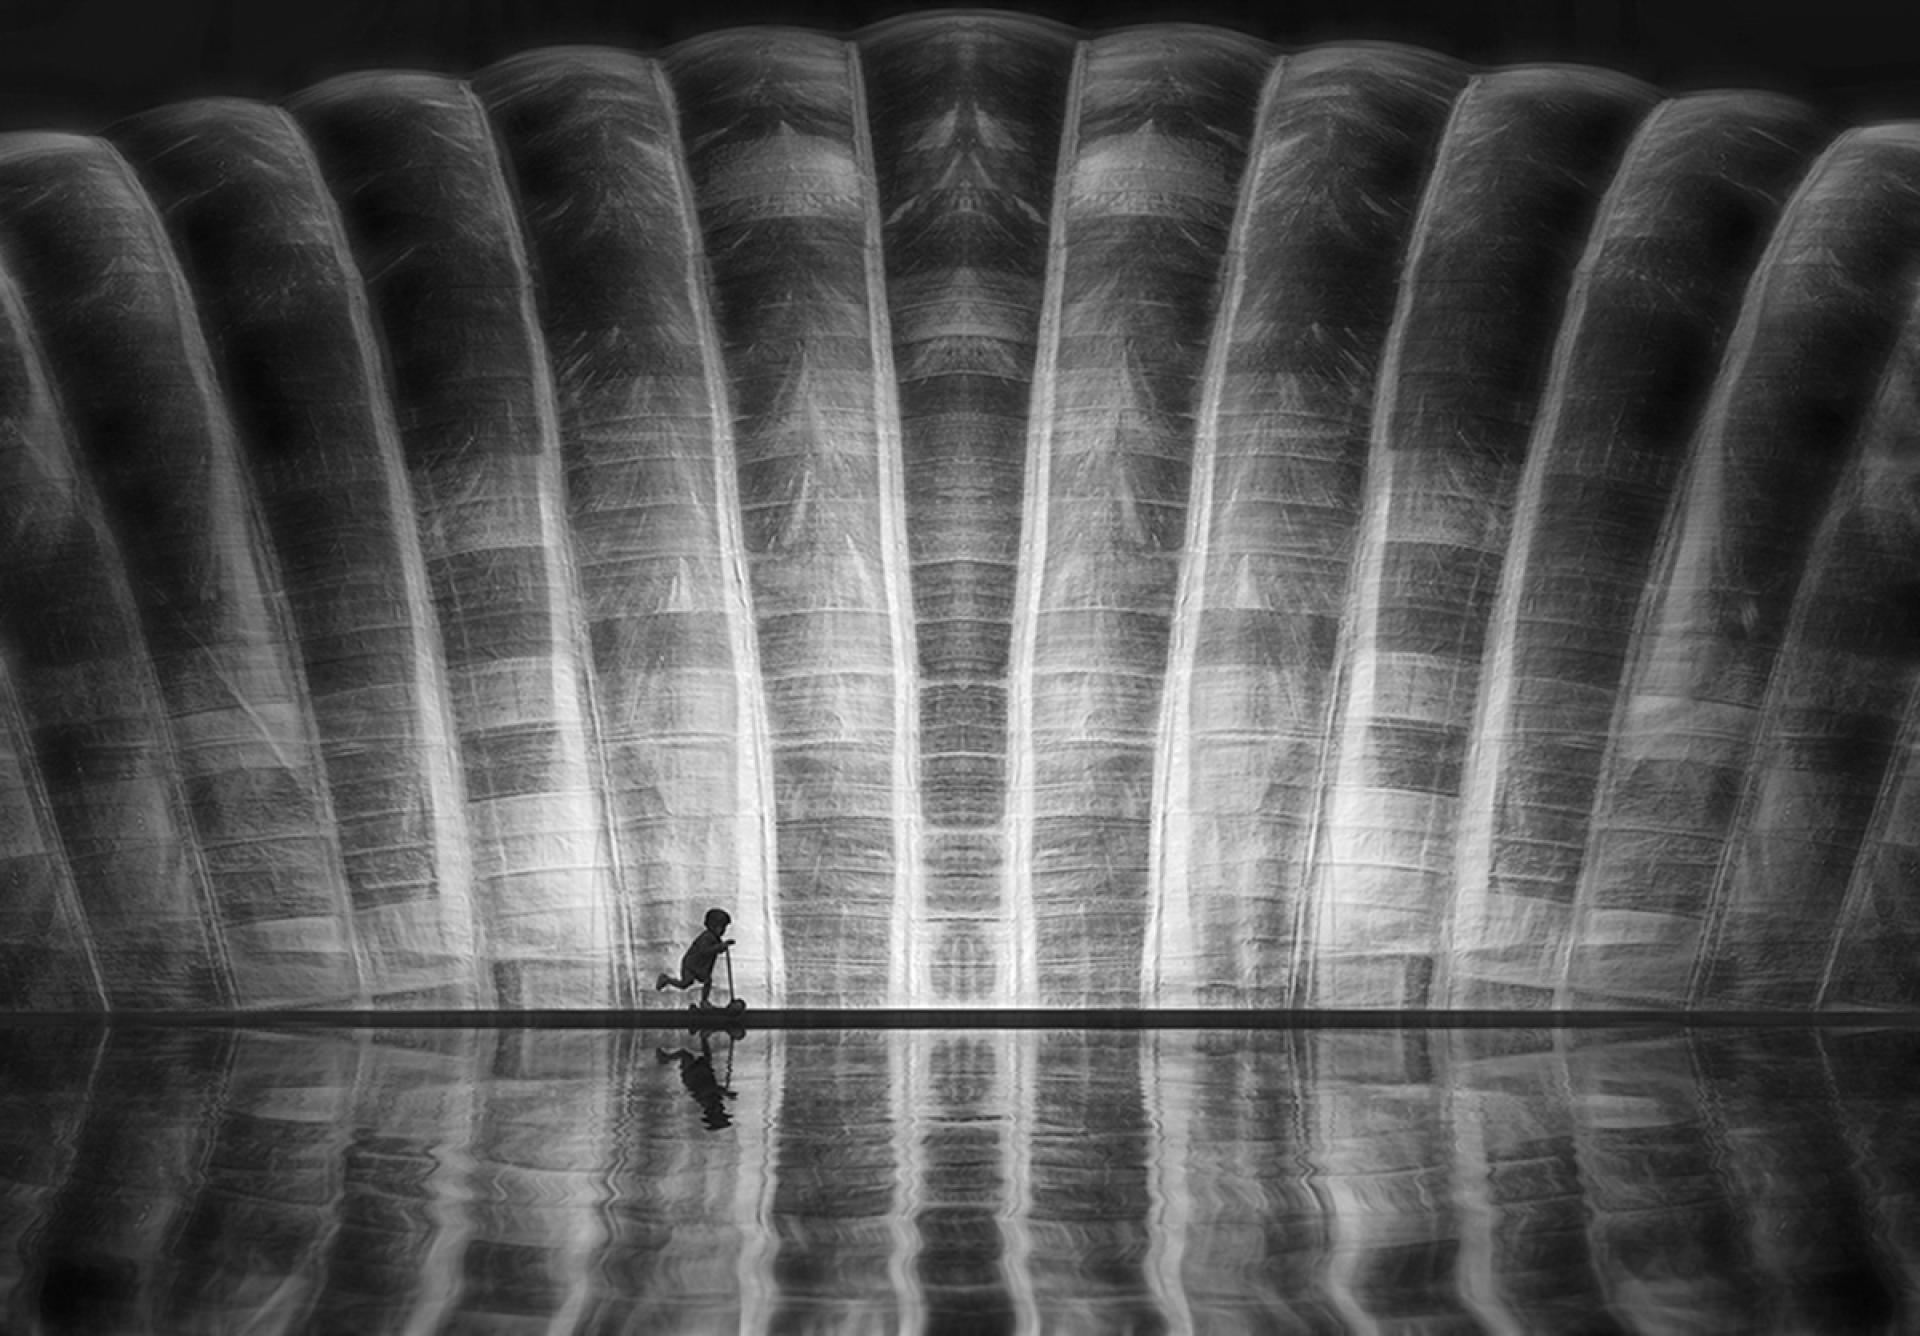 London Photography Awards Winner - The insignificance of man 